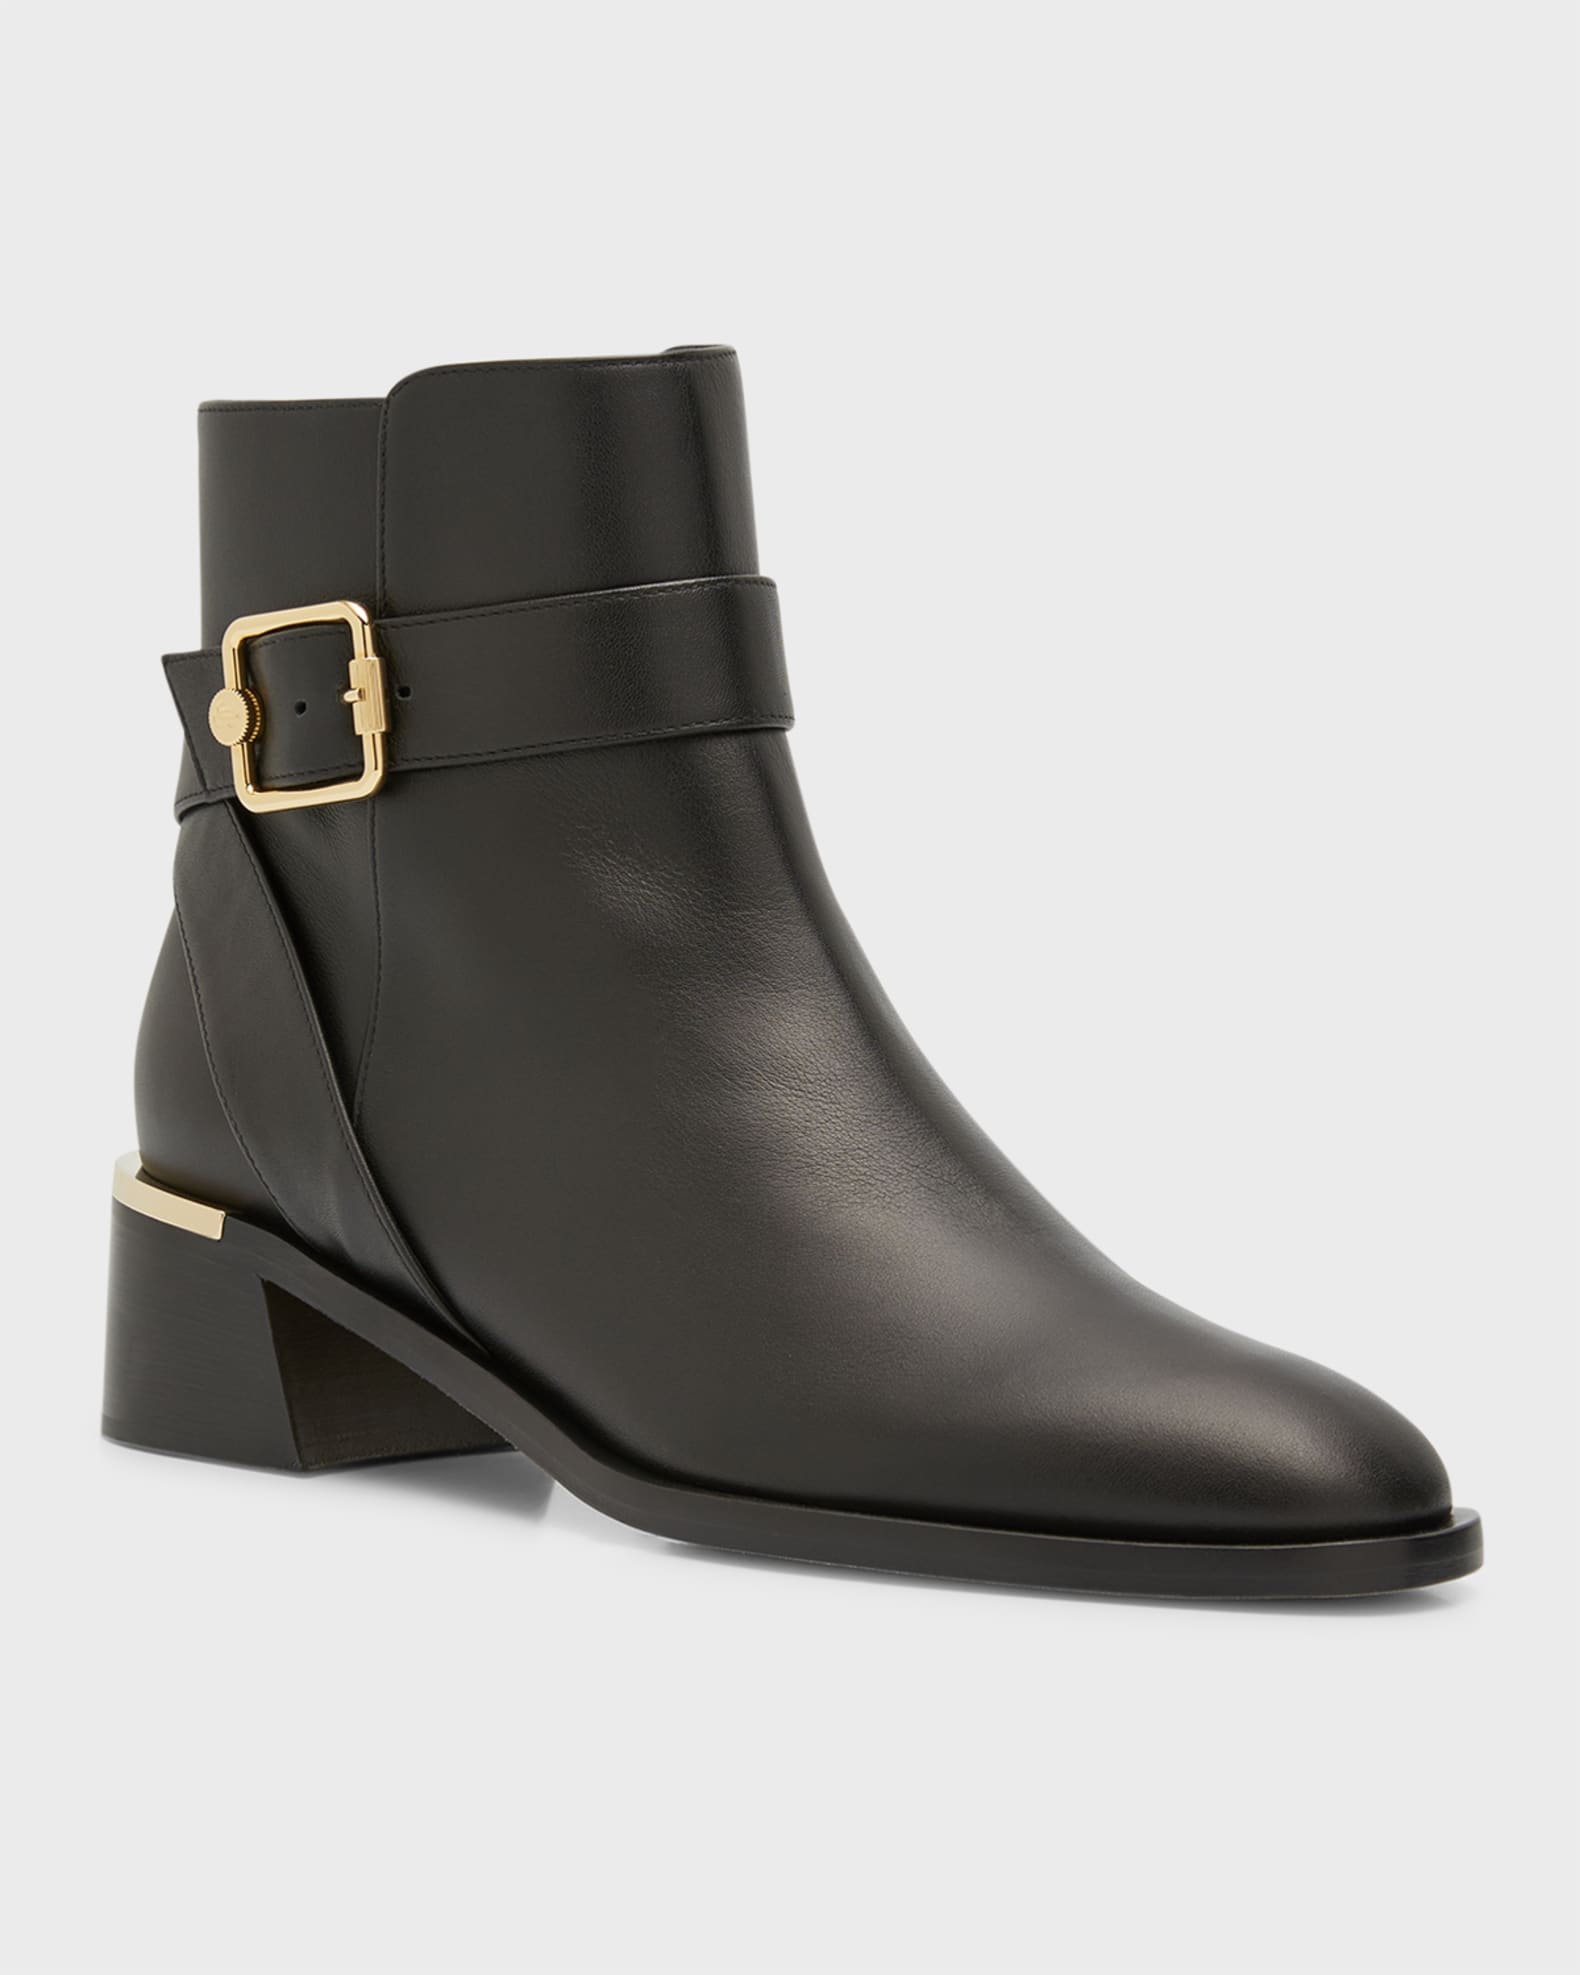 Jimmy Choo Clarice Leather Buckle Ankle Booties | Neiman Marcus